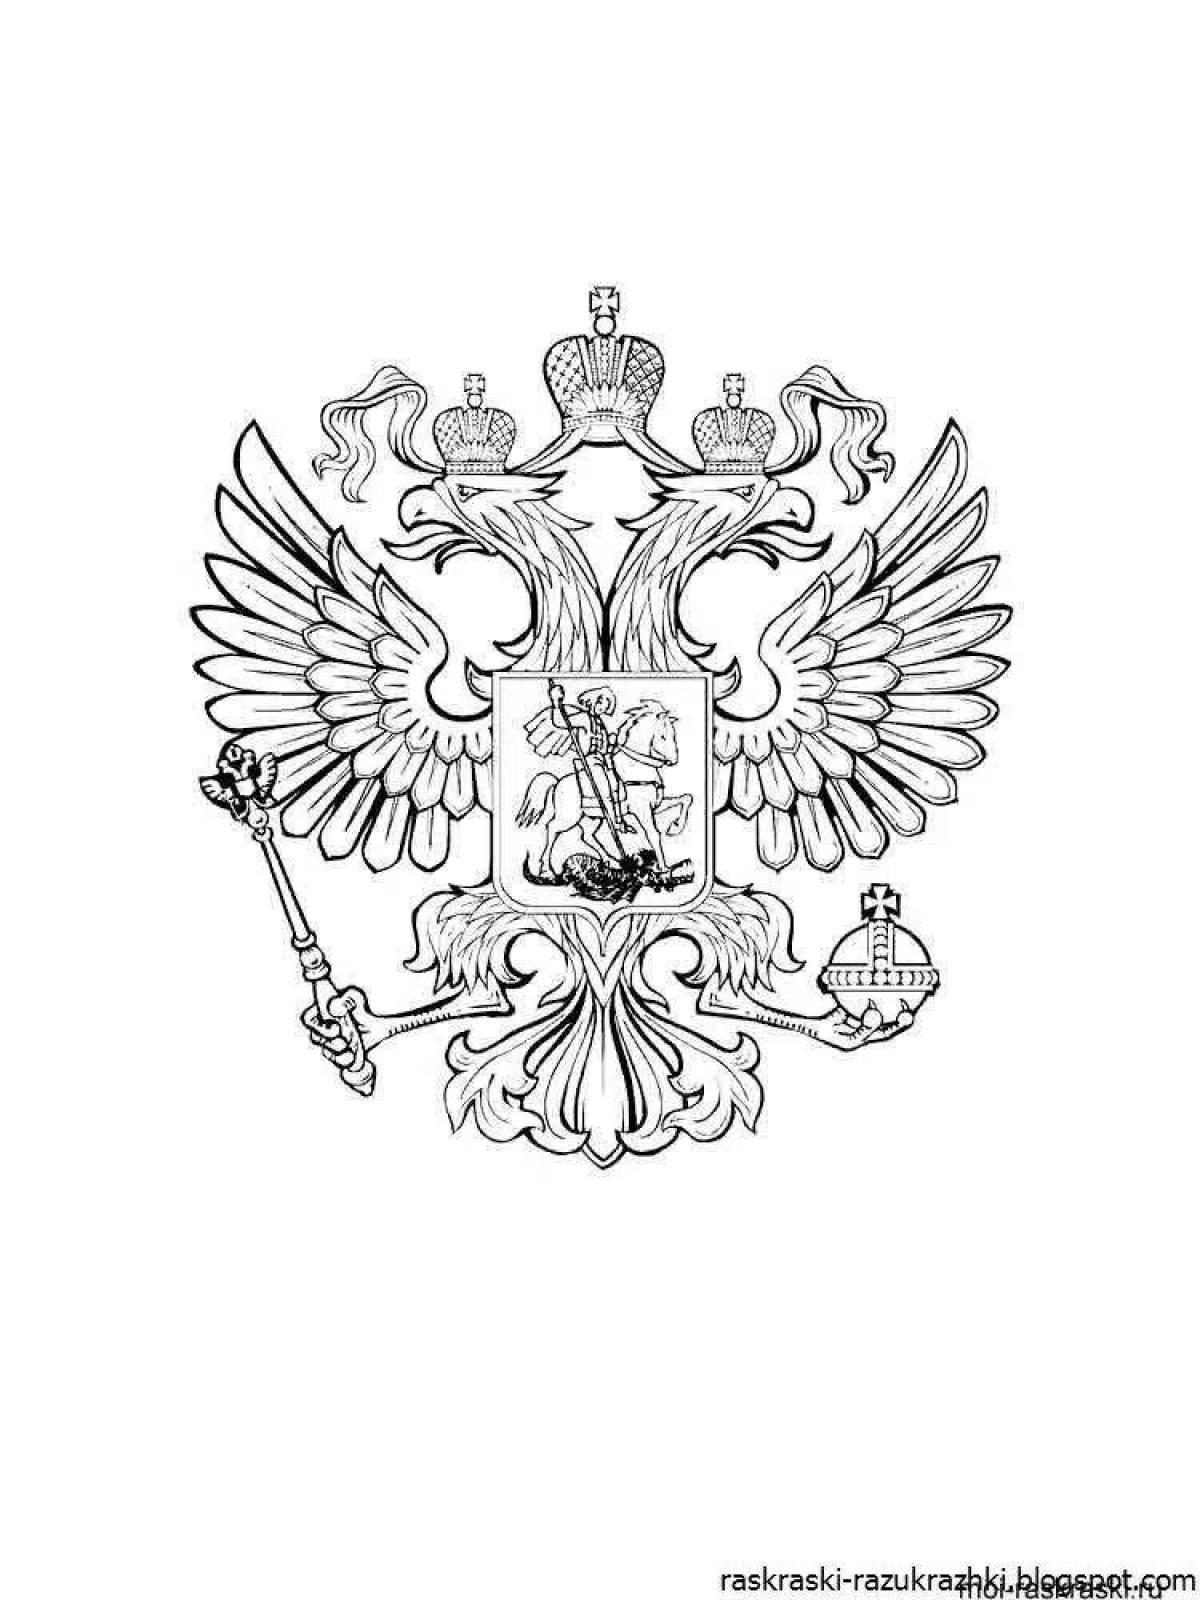 Coloring grandure coat of arms of the russian federation